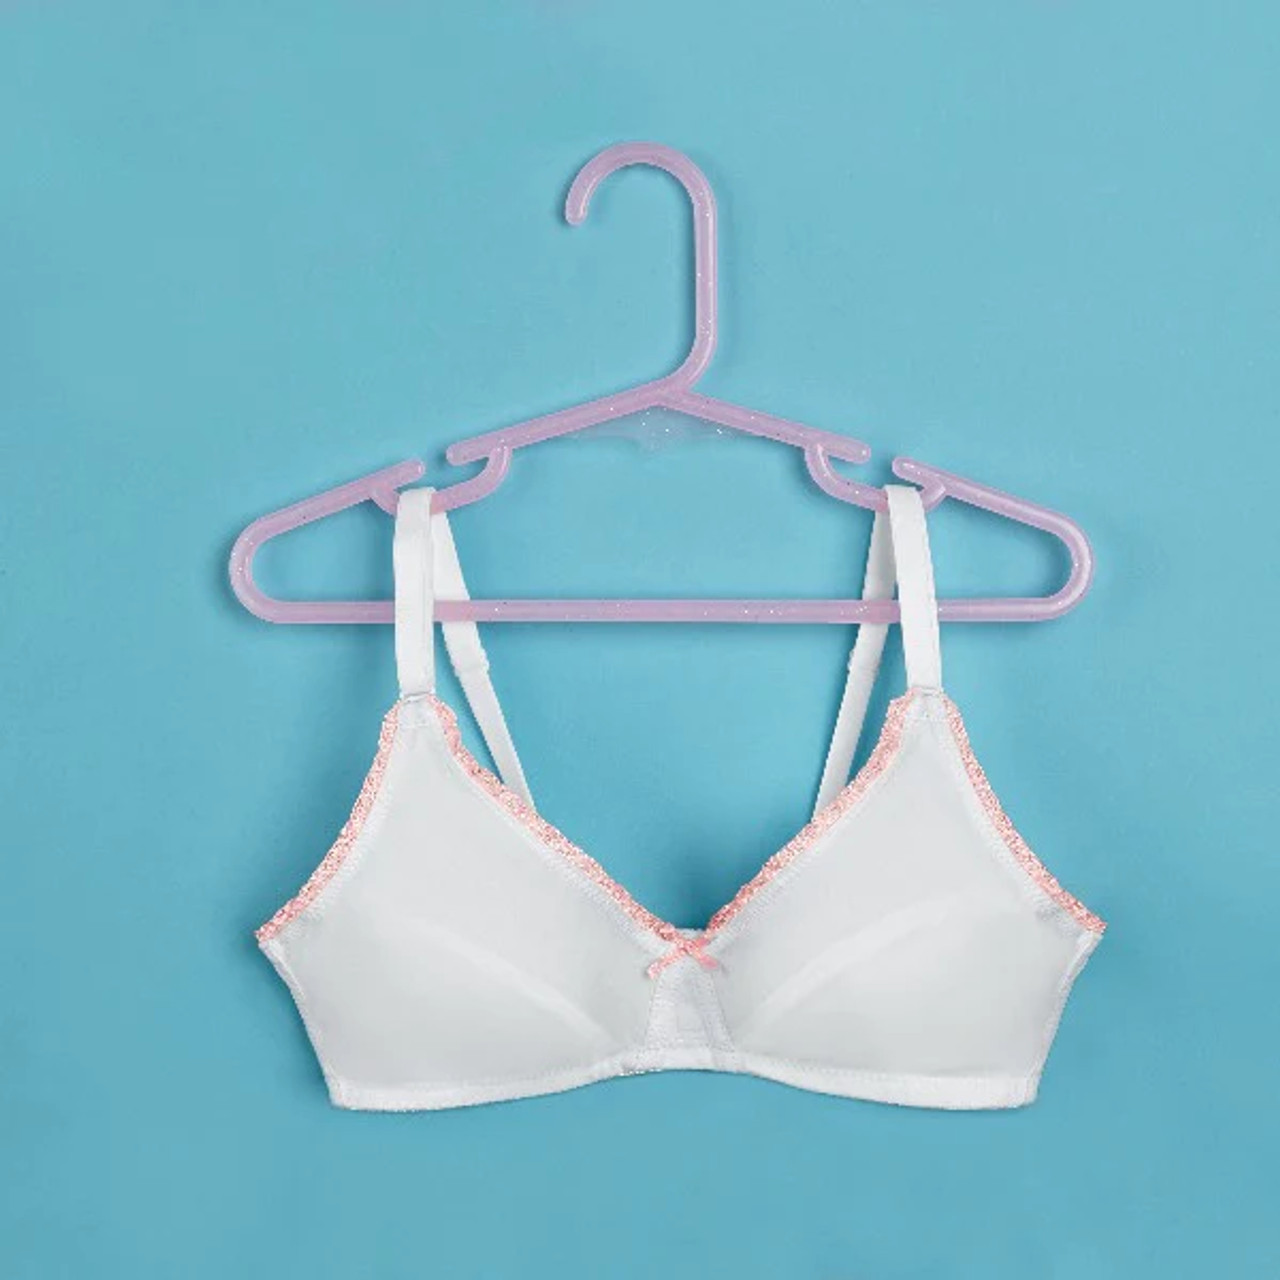 Bras in the size 32AA for Women on sale